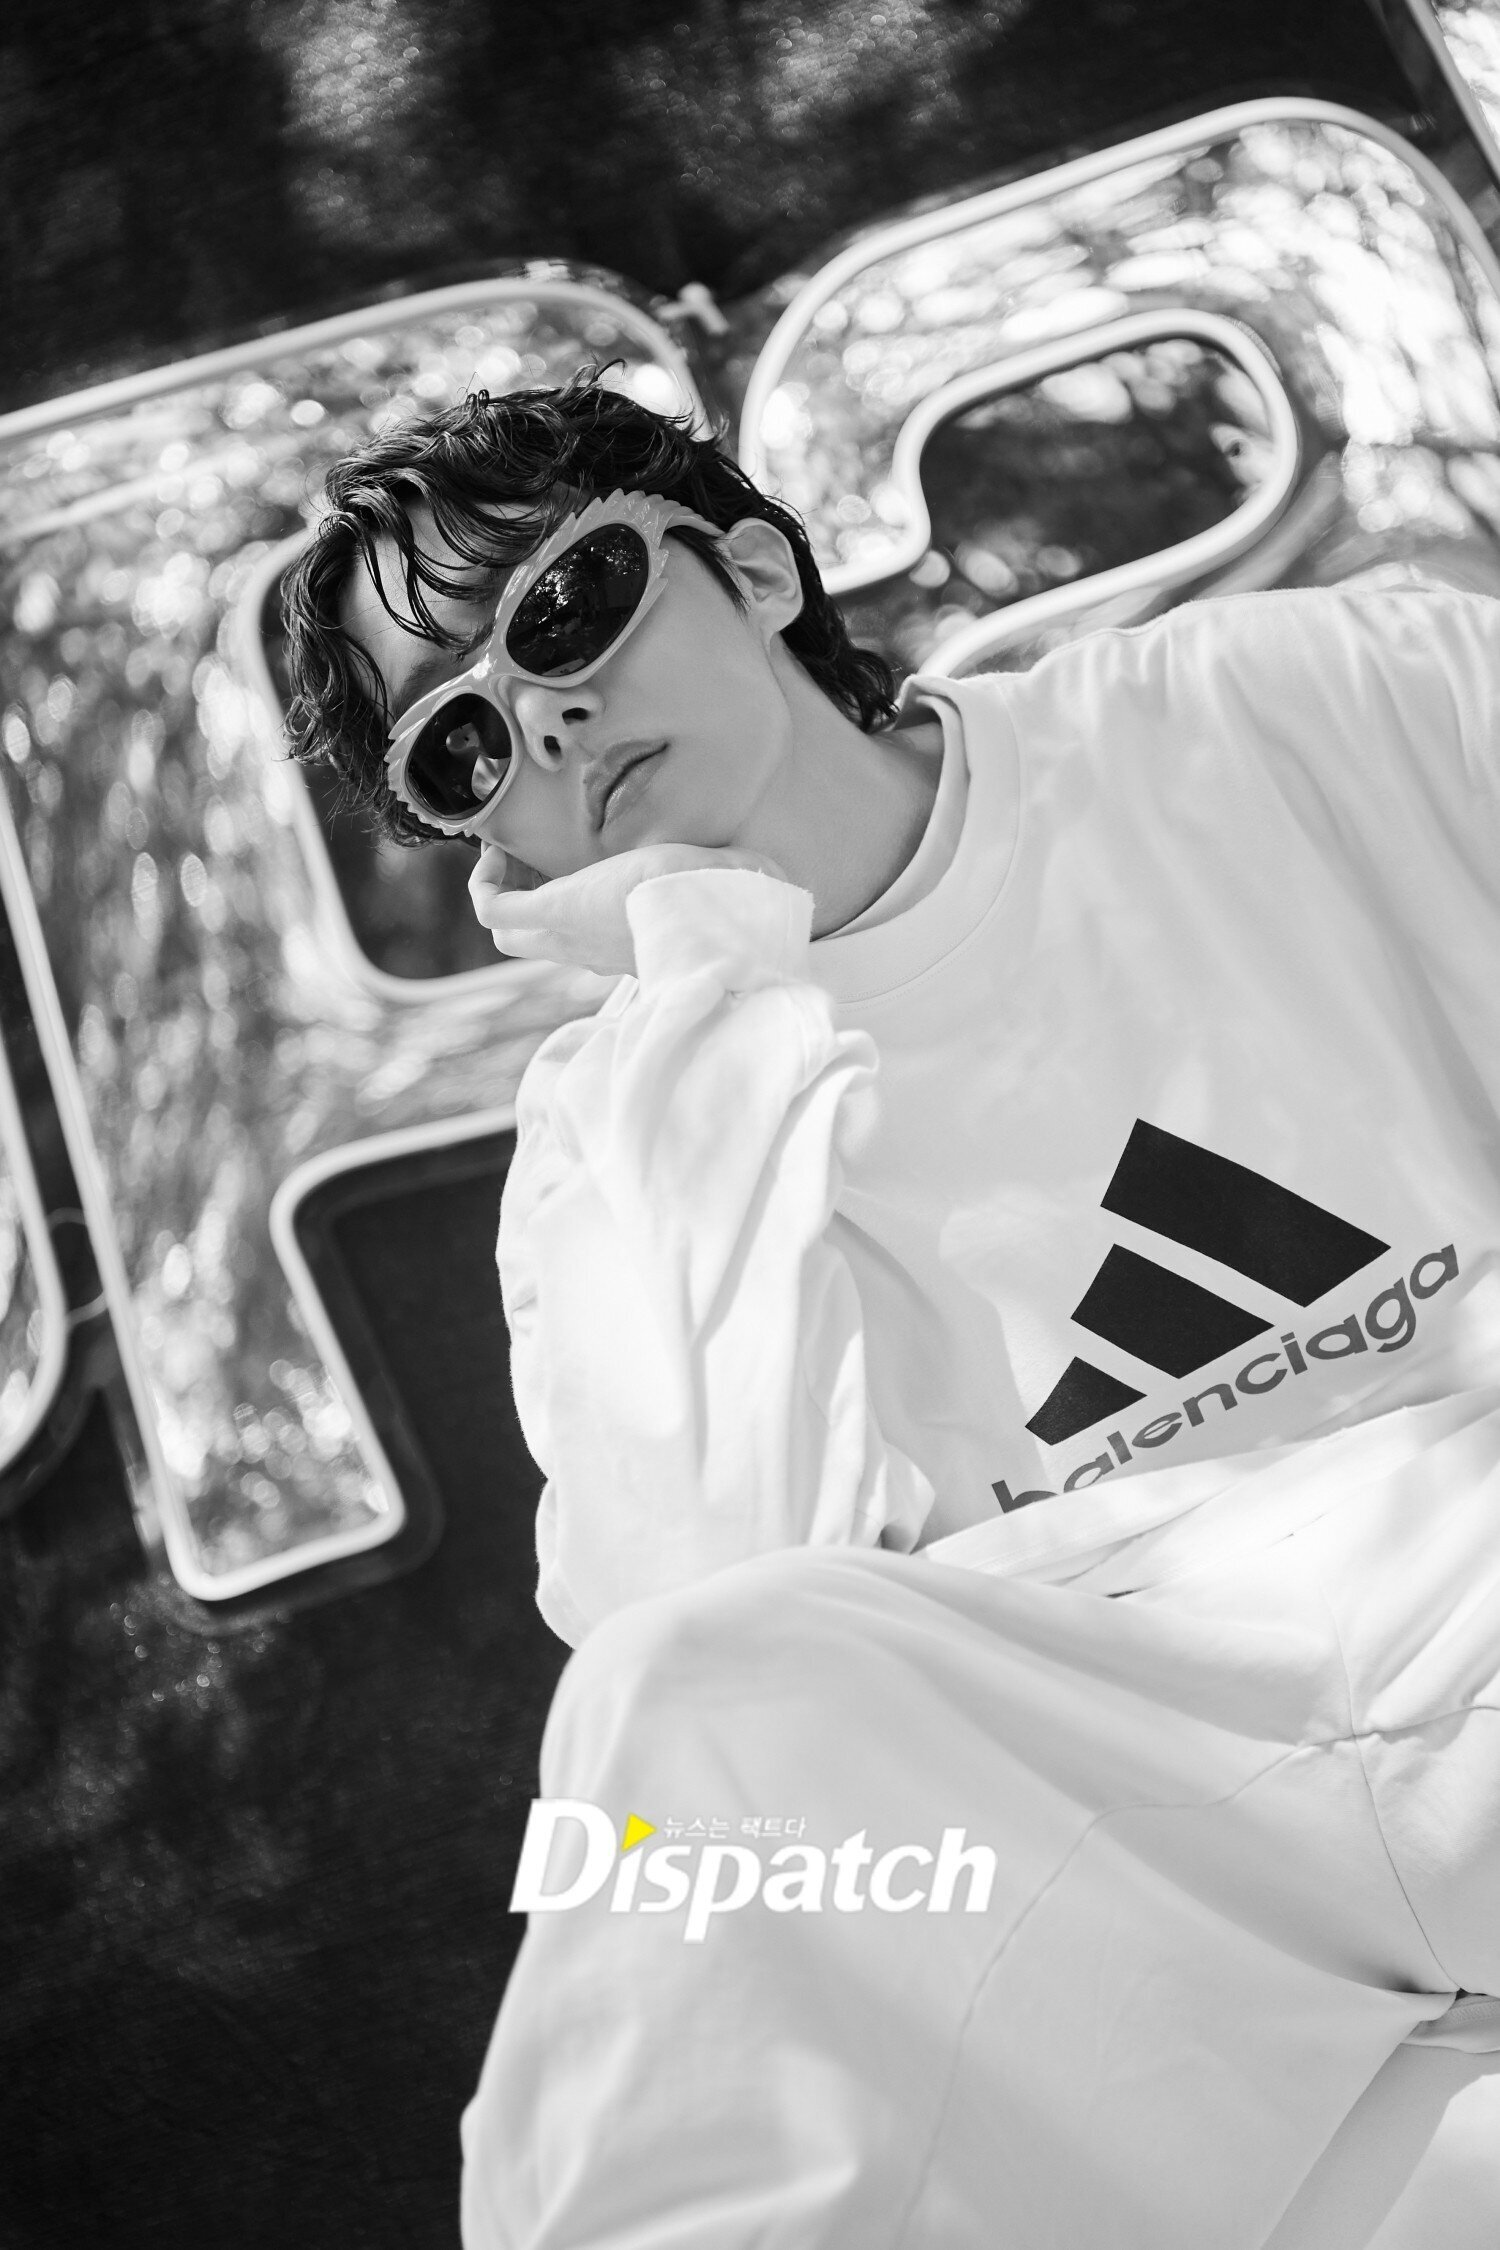 Dispatch Drops 20+ HD Behind-The-Scenes Photos Of BTS's J-Hope Looking Hot  AF At Lollapalooza - Koreaboo